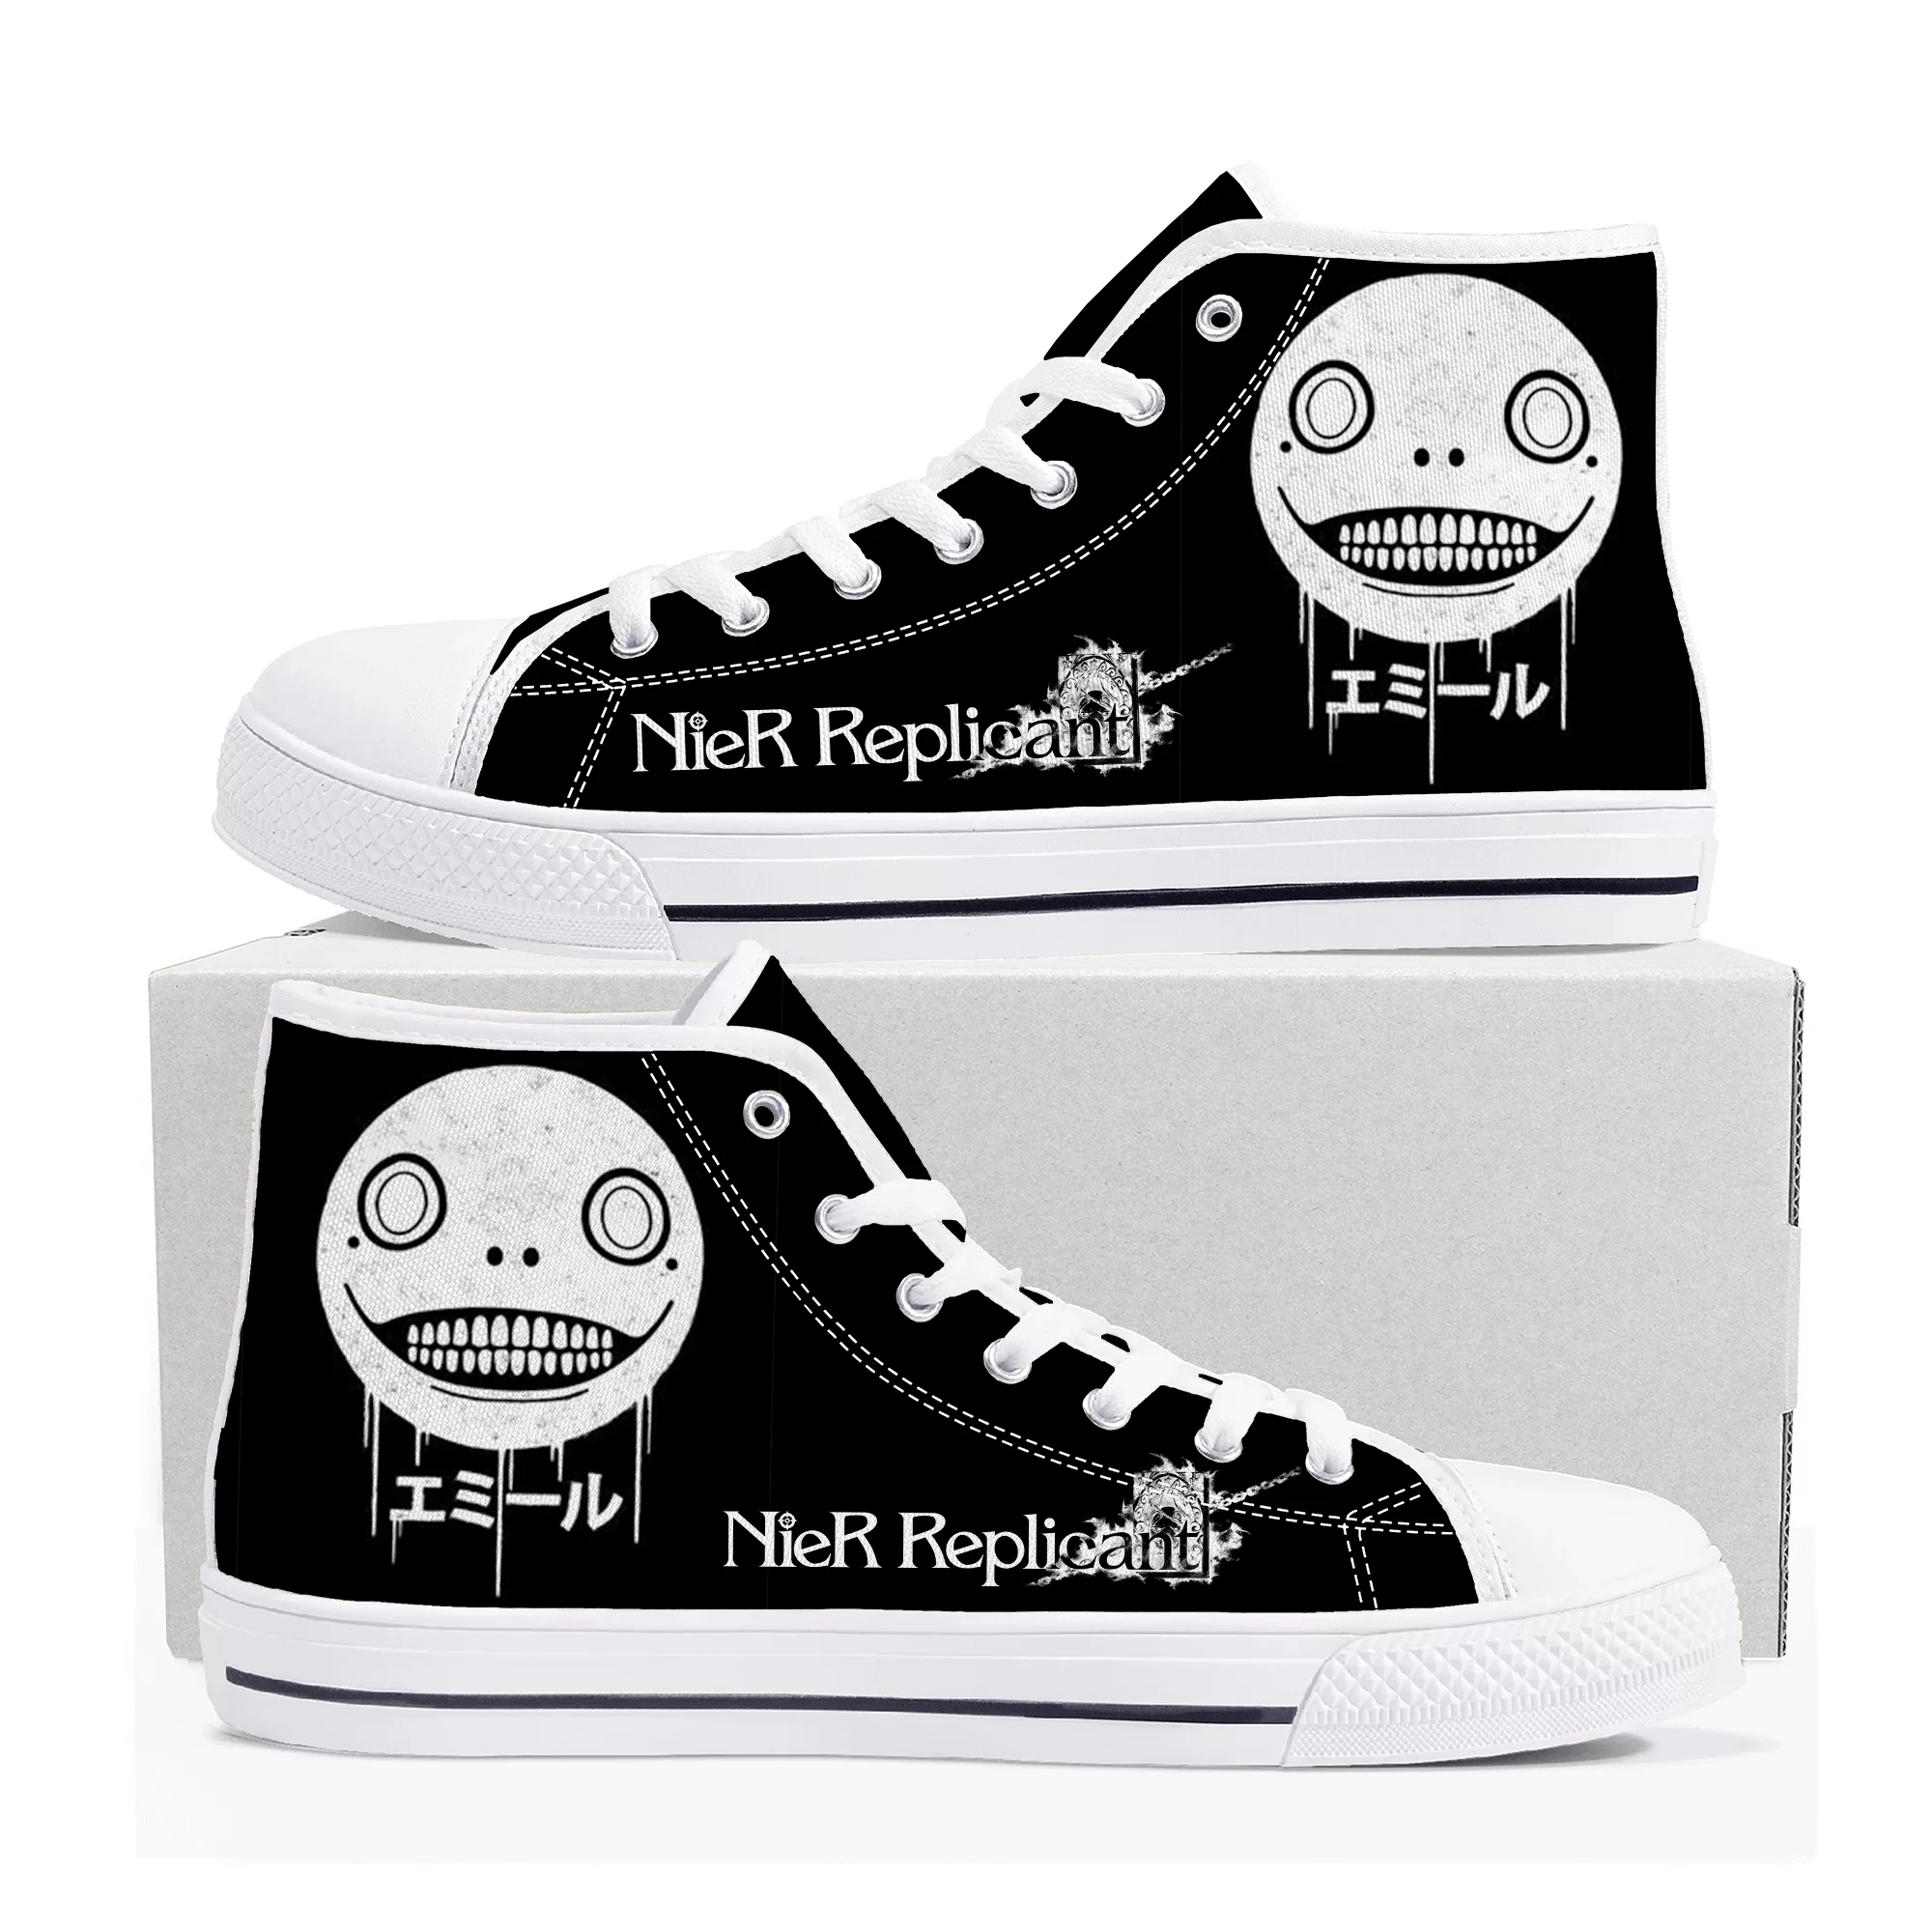 

Nier Replicant High Top Sneakers Cartoon Game Mens Womens Teenager High Quality Fashion Canvas Shoes Casual Tailor Made Sneaker